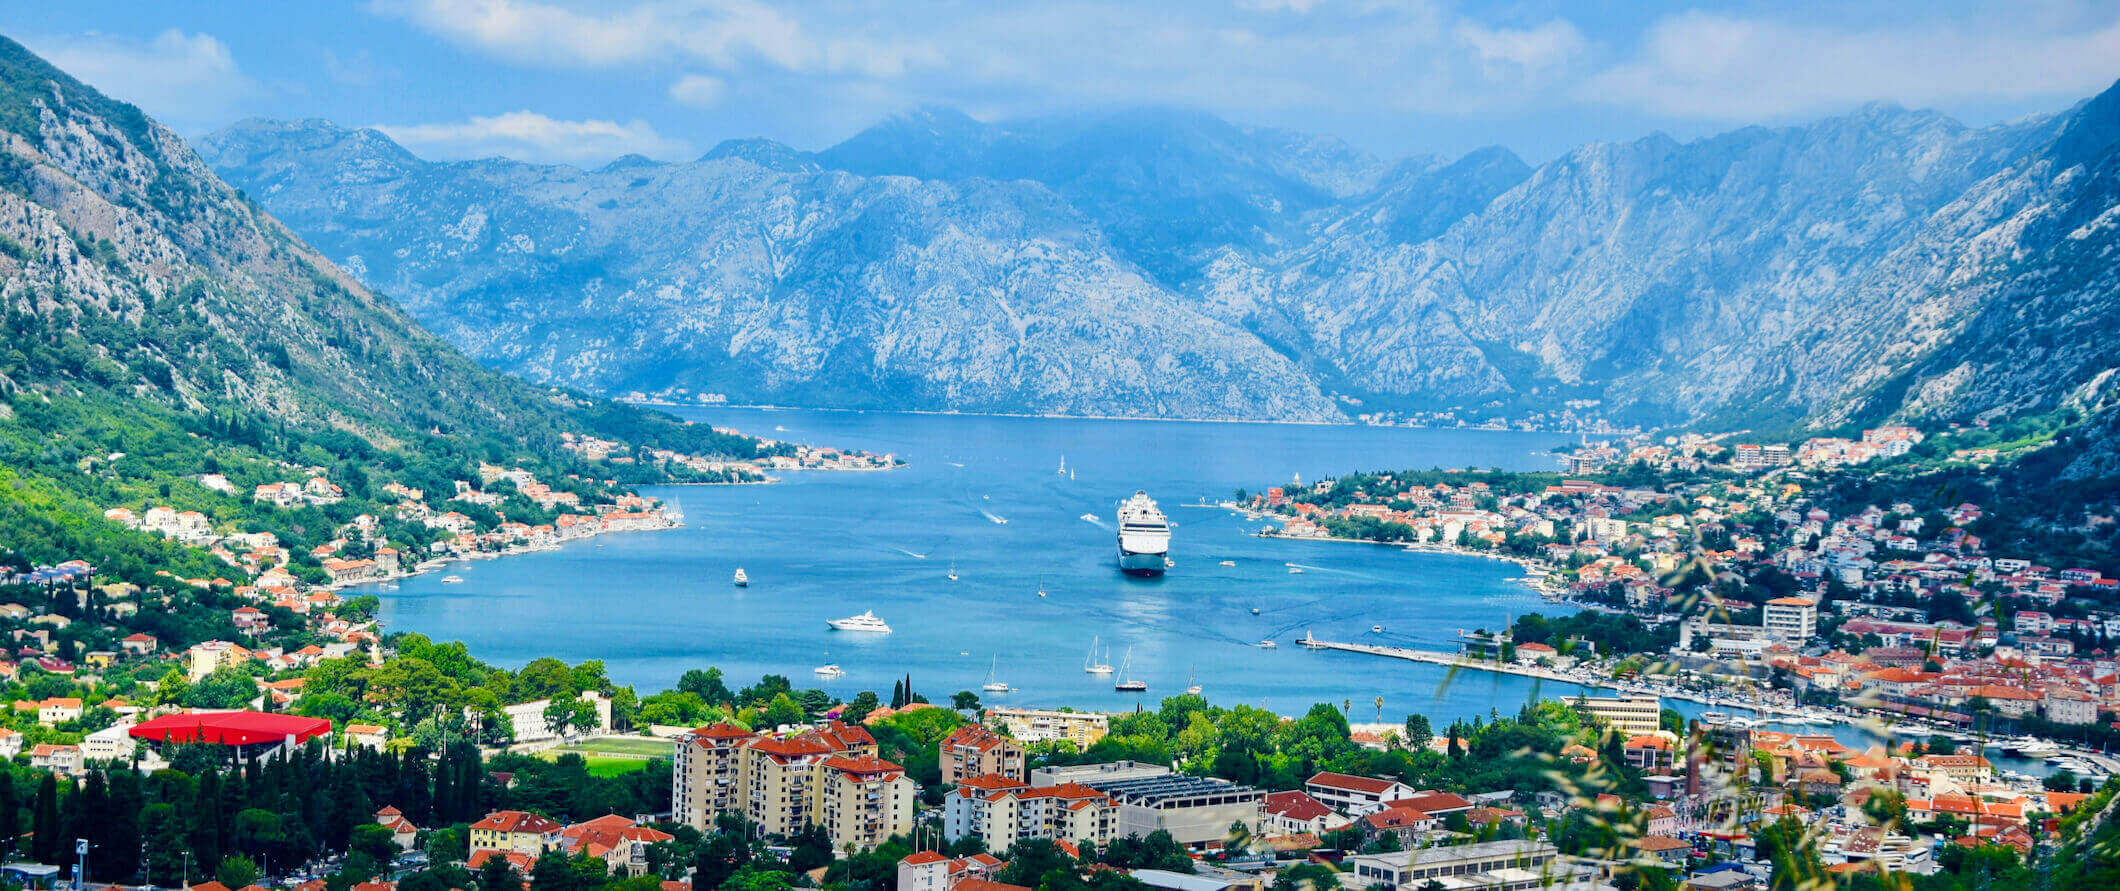 A beautiful view over the city of Kotor and its waters in Montenegro